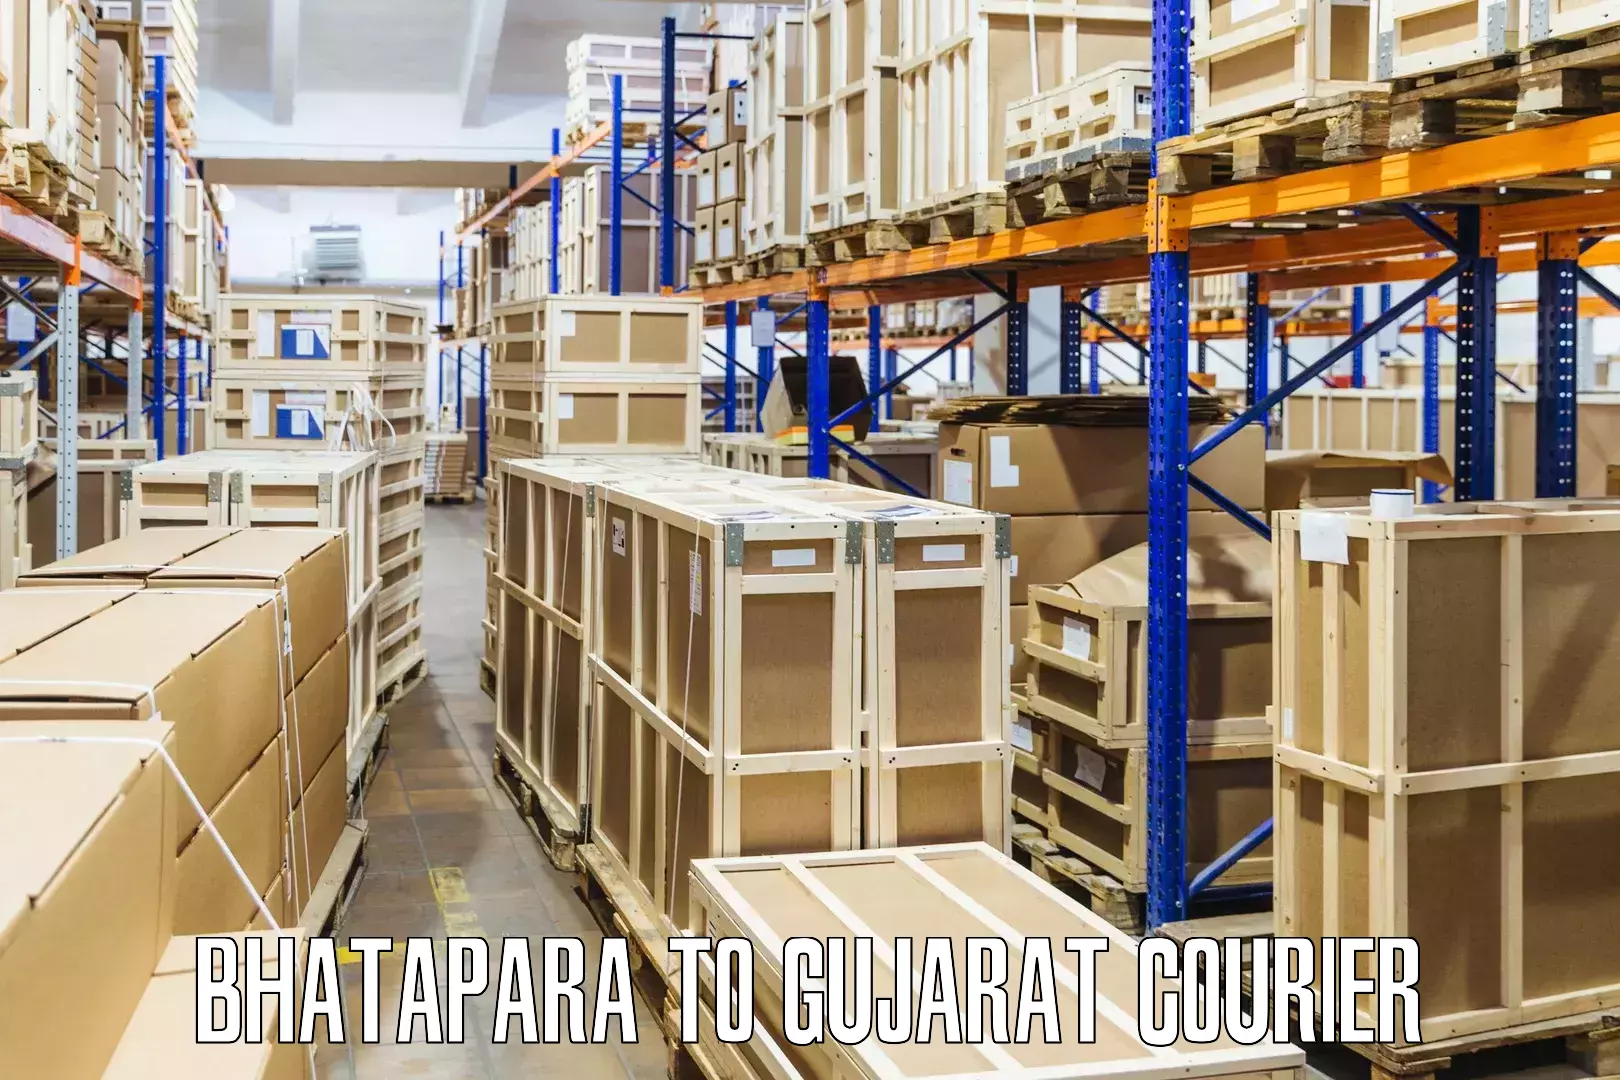 Customizable delivery plans Bhatapara to Surat